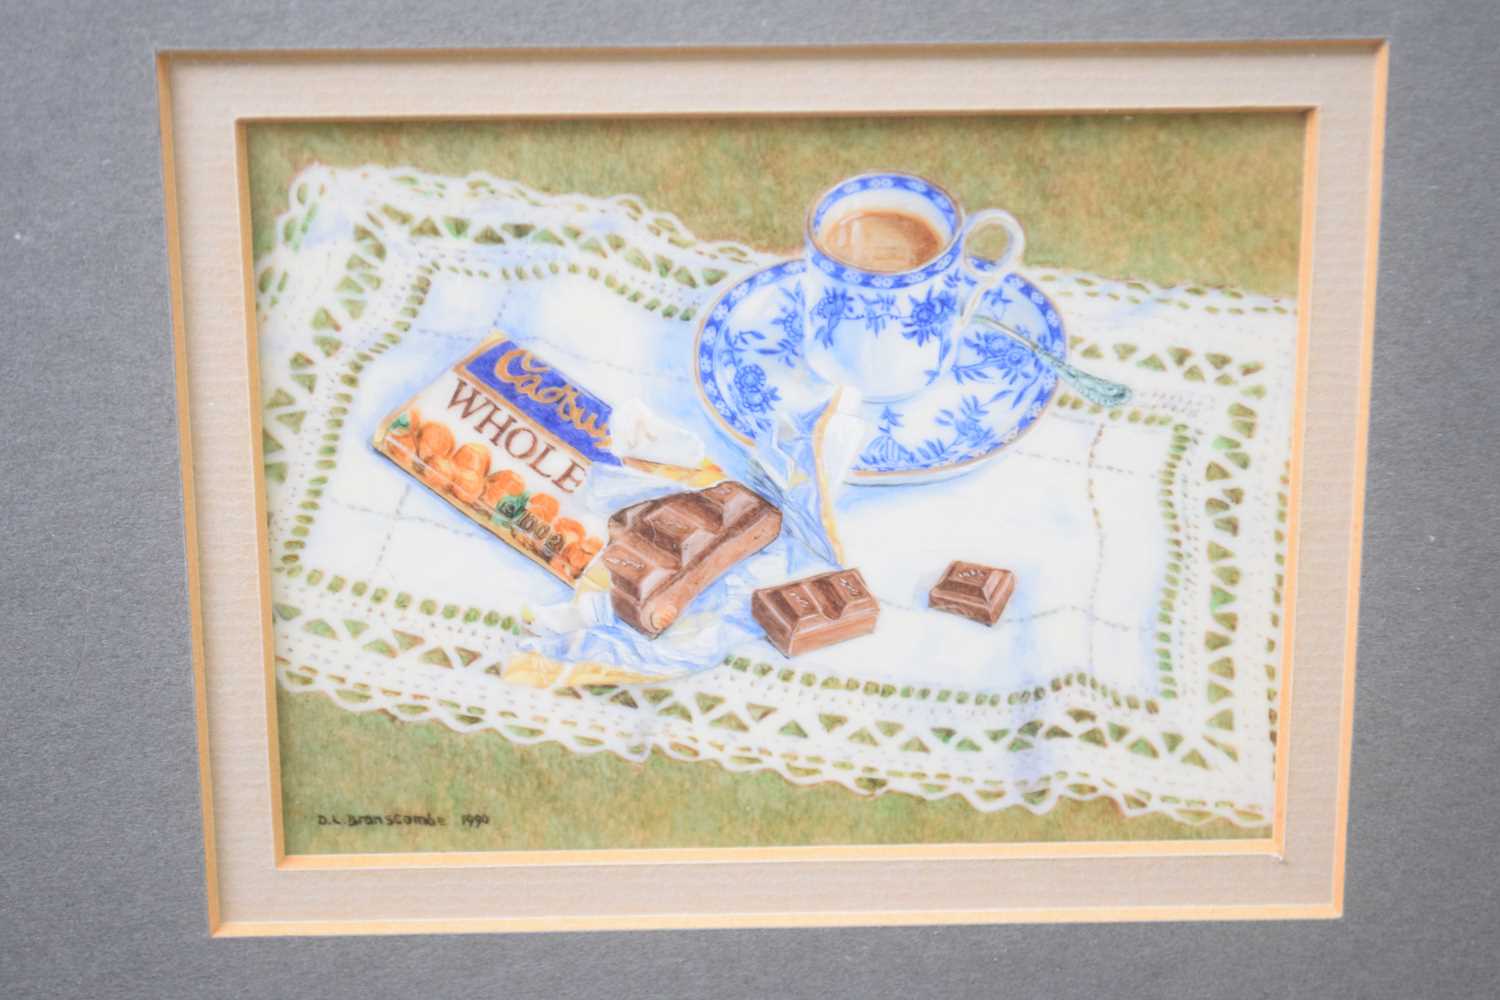 Dianne Branscombe (B.1949), signed miniature watercolour 'Chocolate Break', dated 1990, framed and - Image 2 of 2